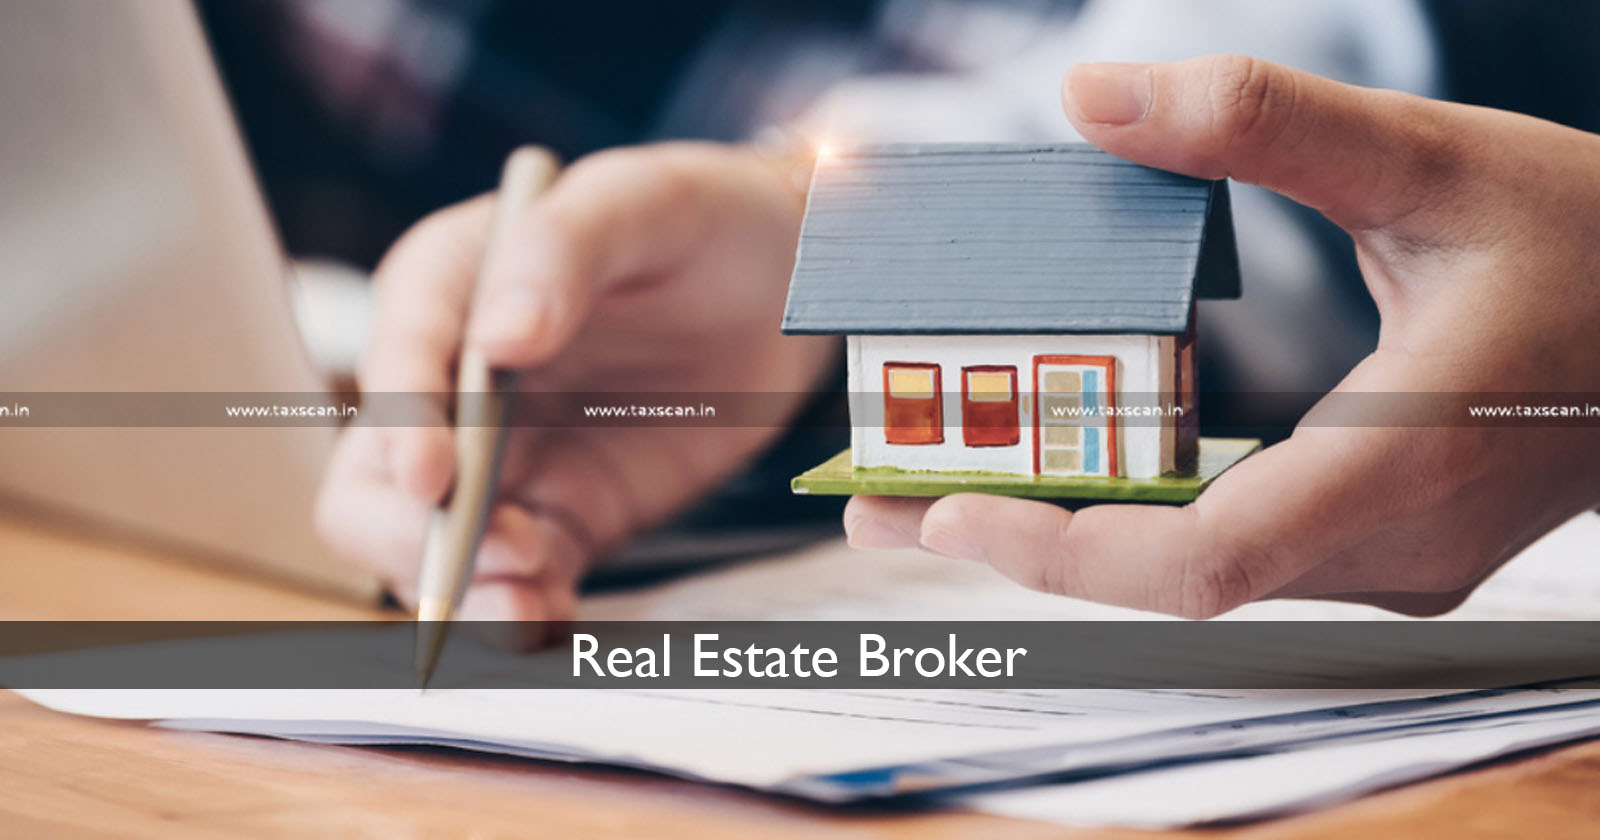 No Addition can be Made on Different Rates Booked By Real Estate Broker - Addition - Real Estate Broker - Selling Property between Different Buyers - ITAT - Taxscan